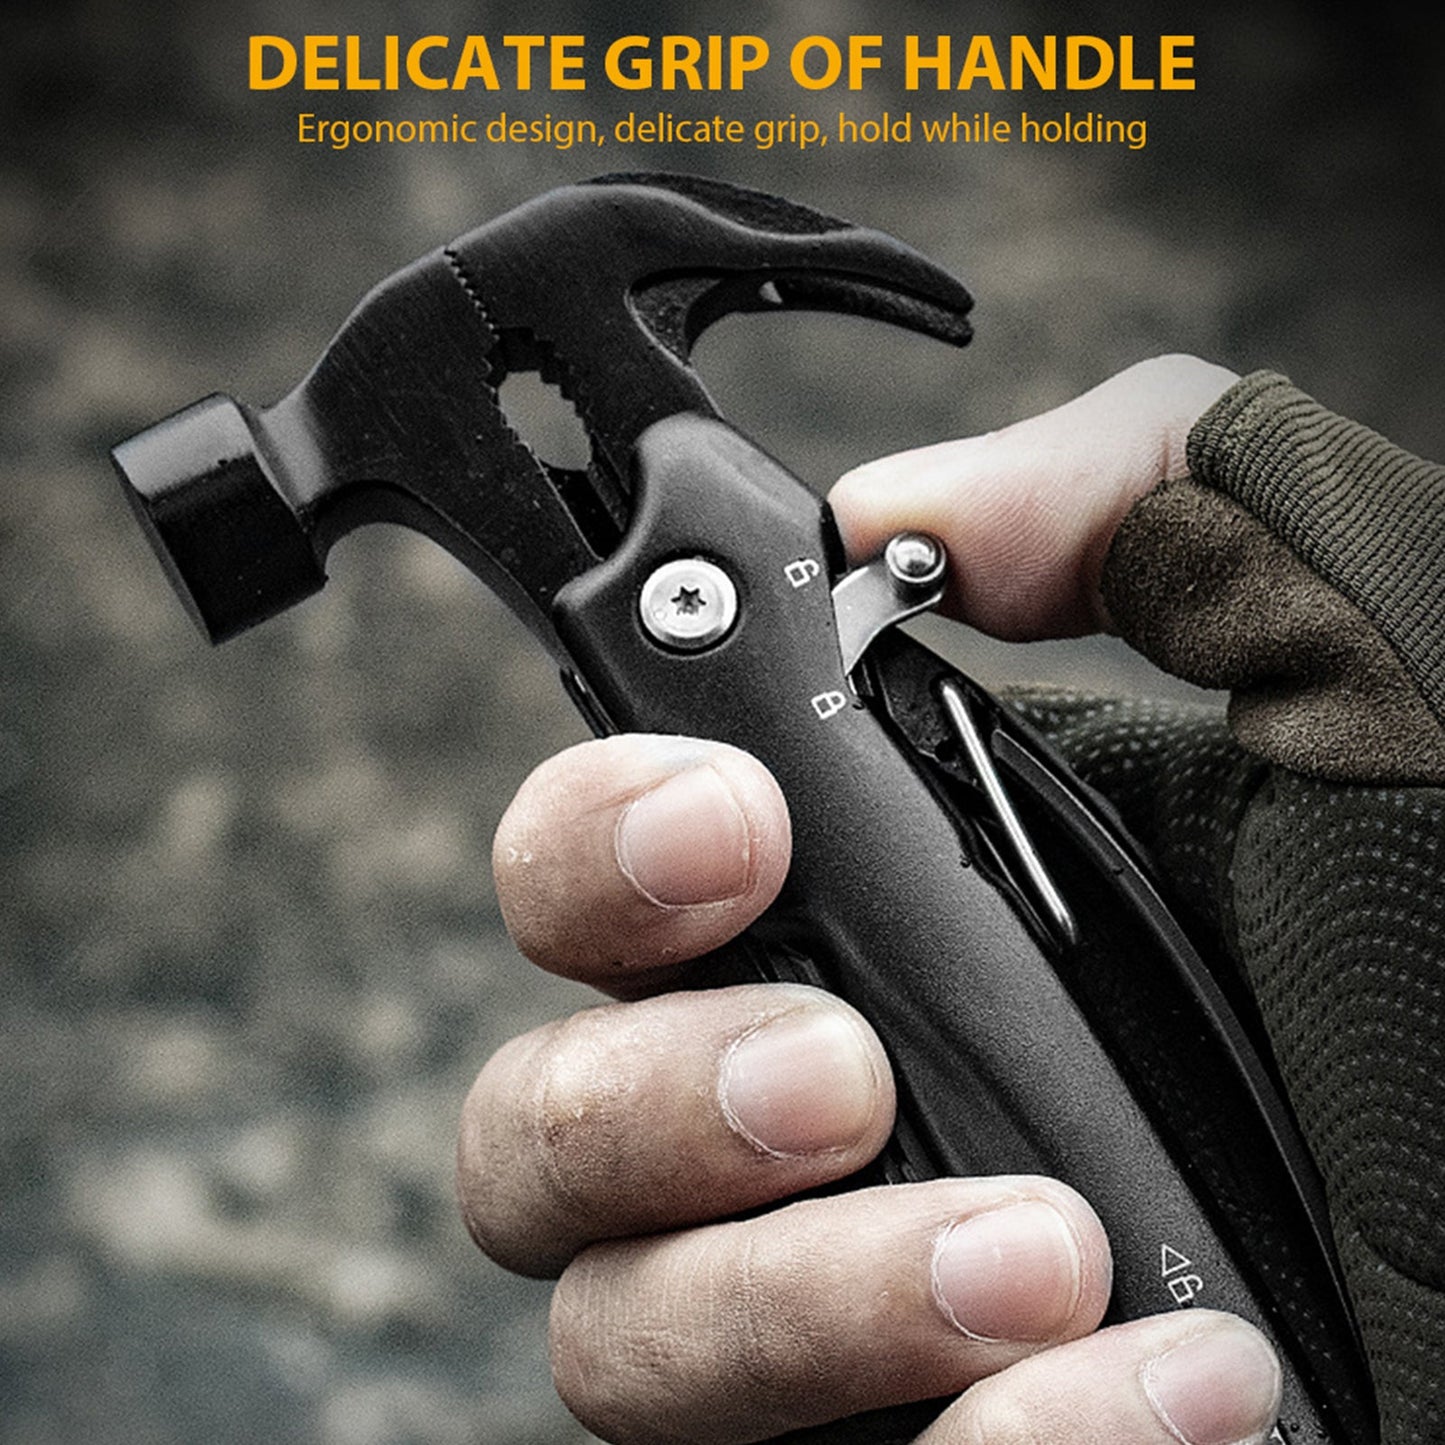 12 in 1 Premium Durable Stainless Steel Construction Multi-tool Hammer